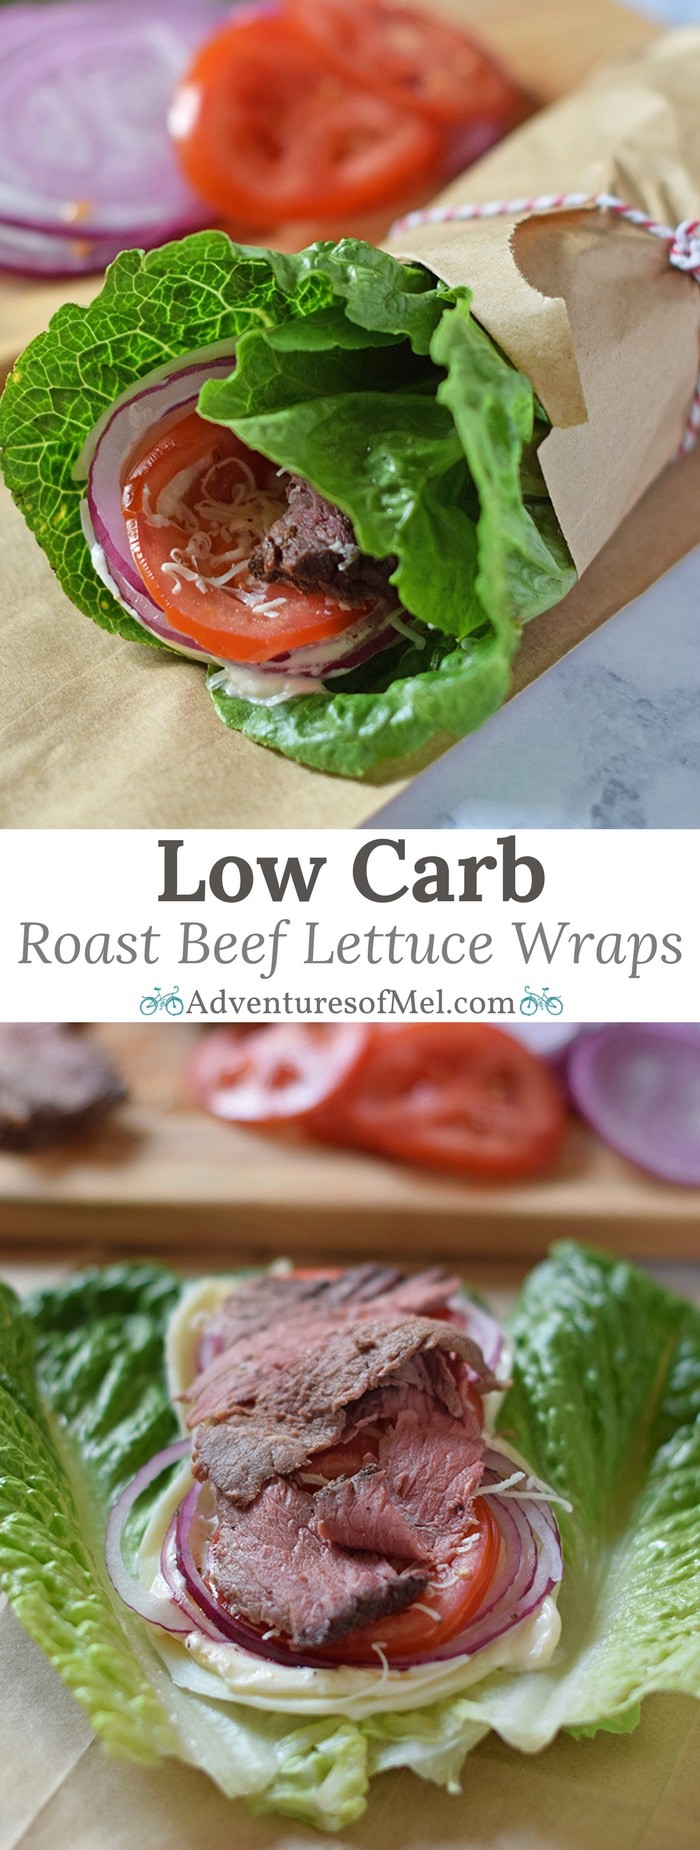 Low Carb Roast Beef Lettuce Wraps are a copycat recipe inspired by a Jimmy John's favorite, the Unwich. Only a few ingredients and 10 minutes to make!